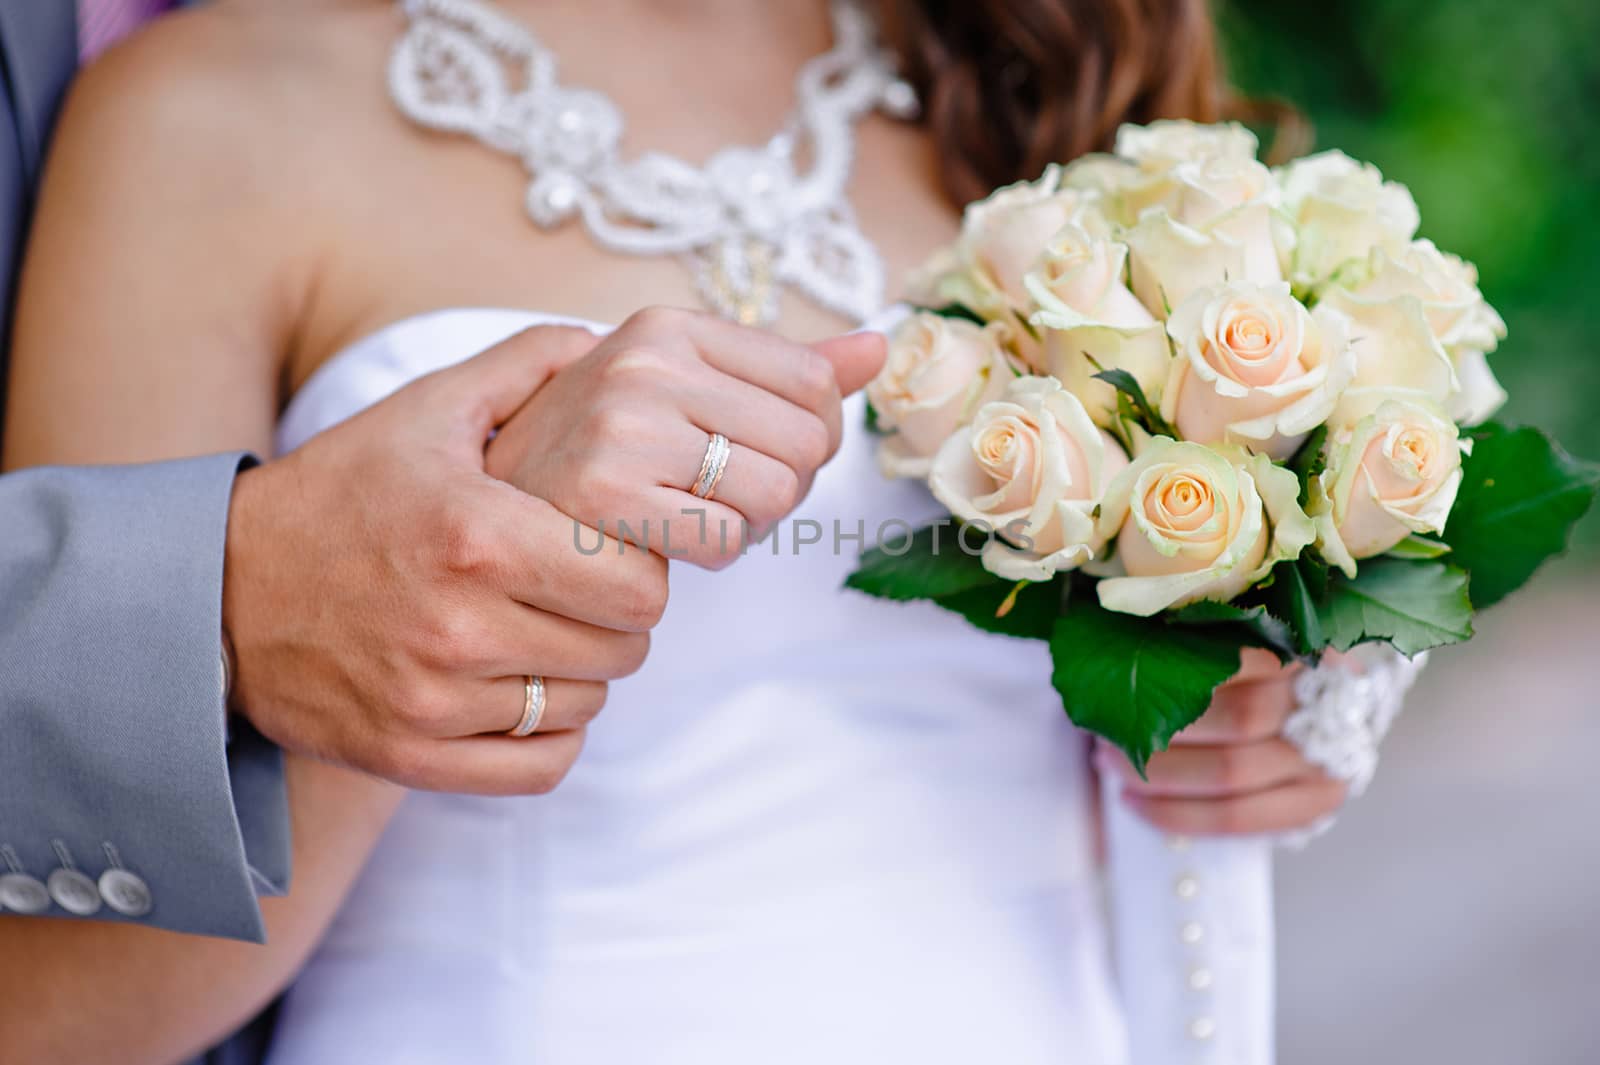 Hands and rings and wedding bouquet.